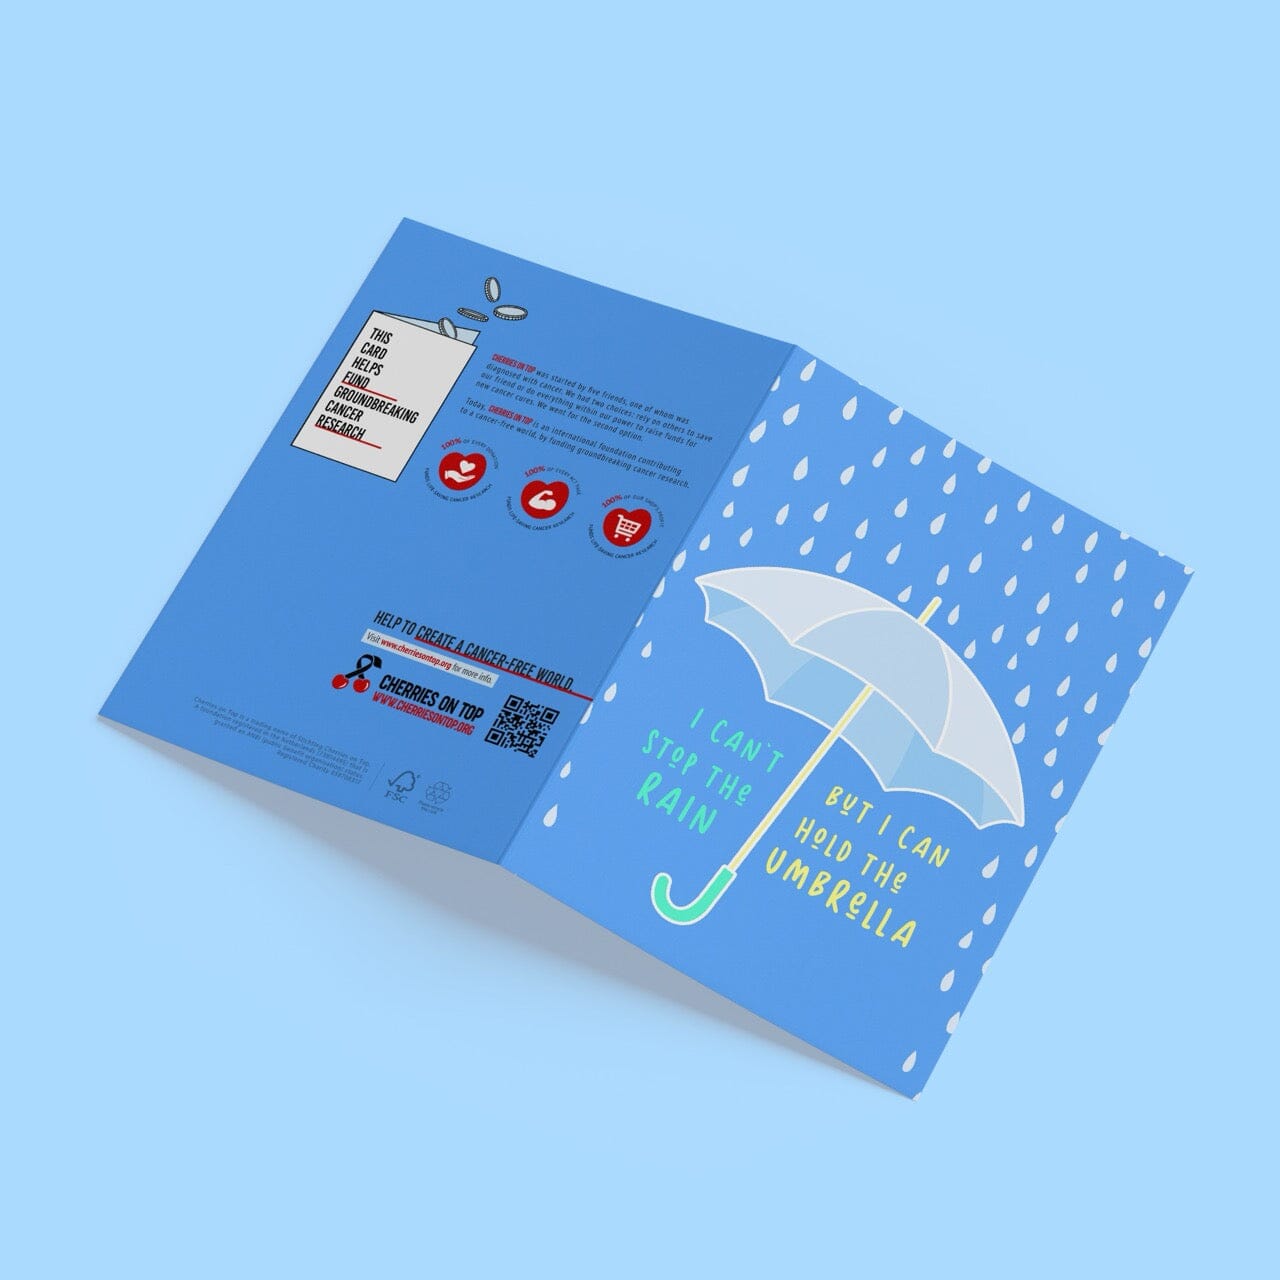 Hold The Umbrella Card Card Cherries on Top Foundation 